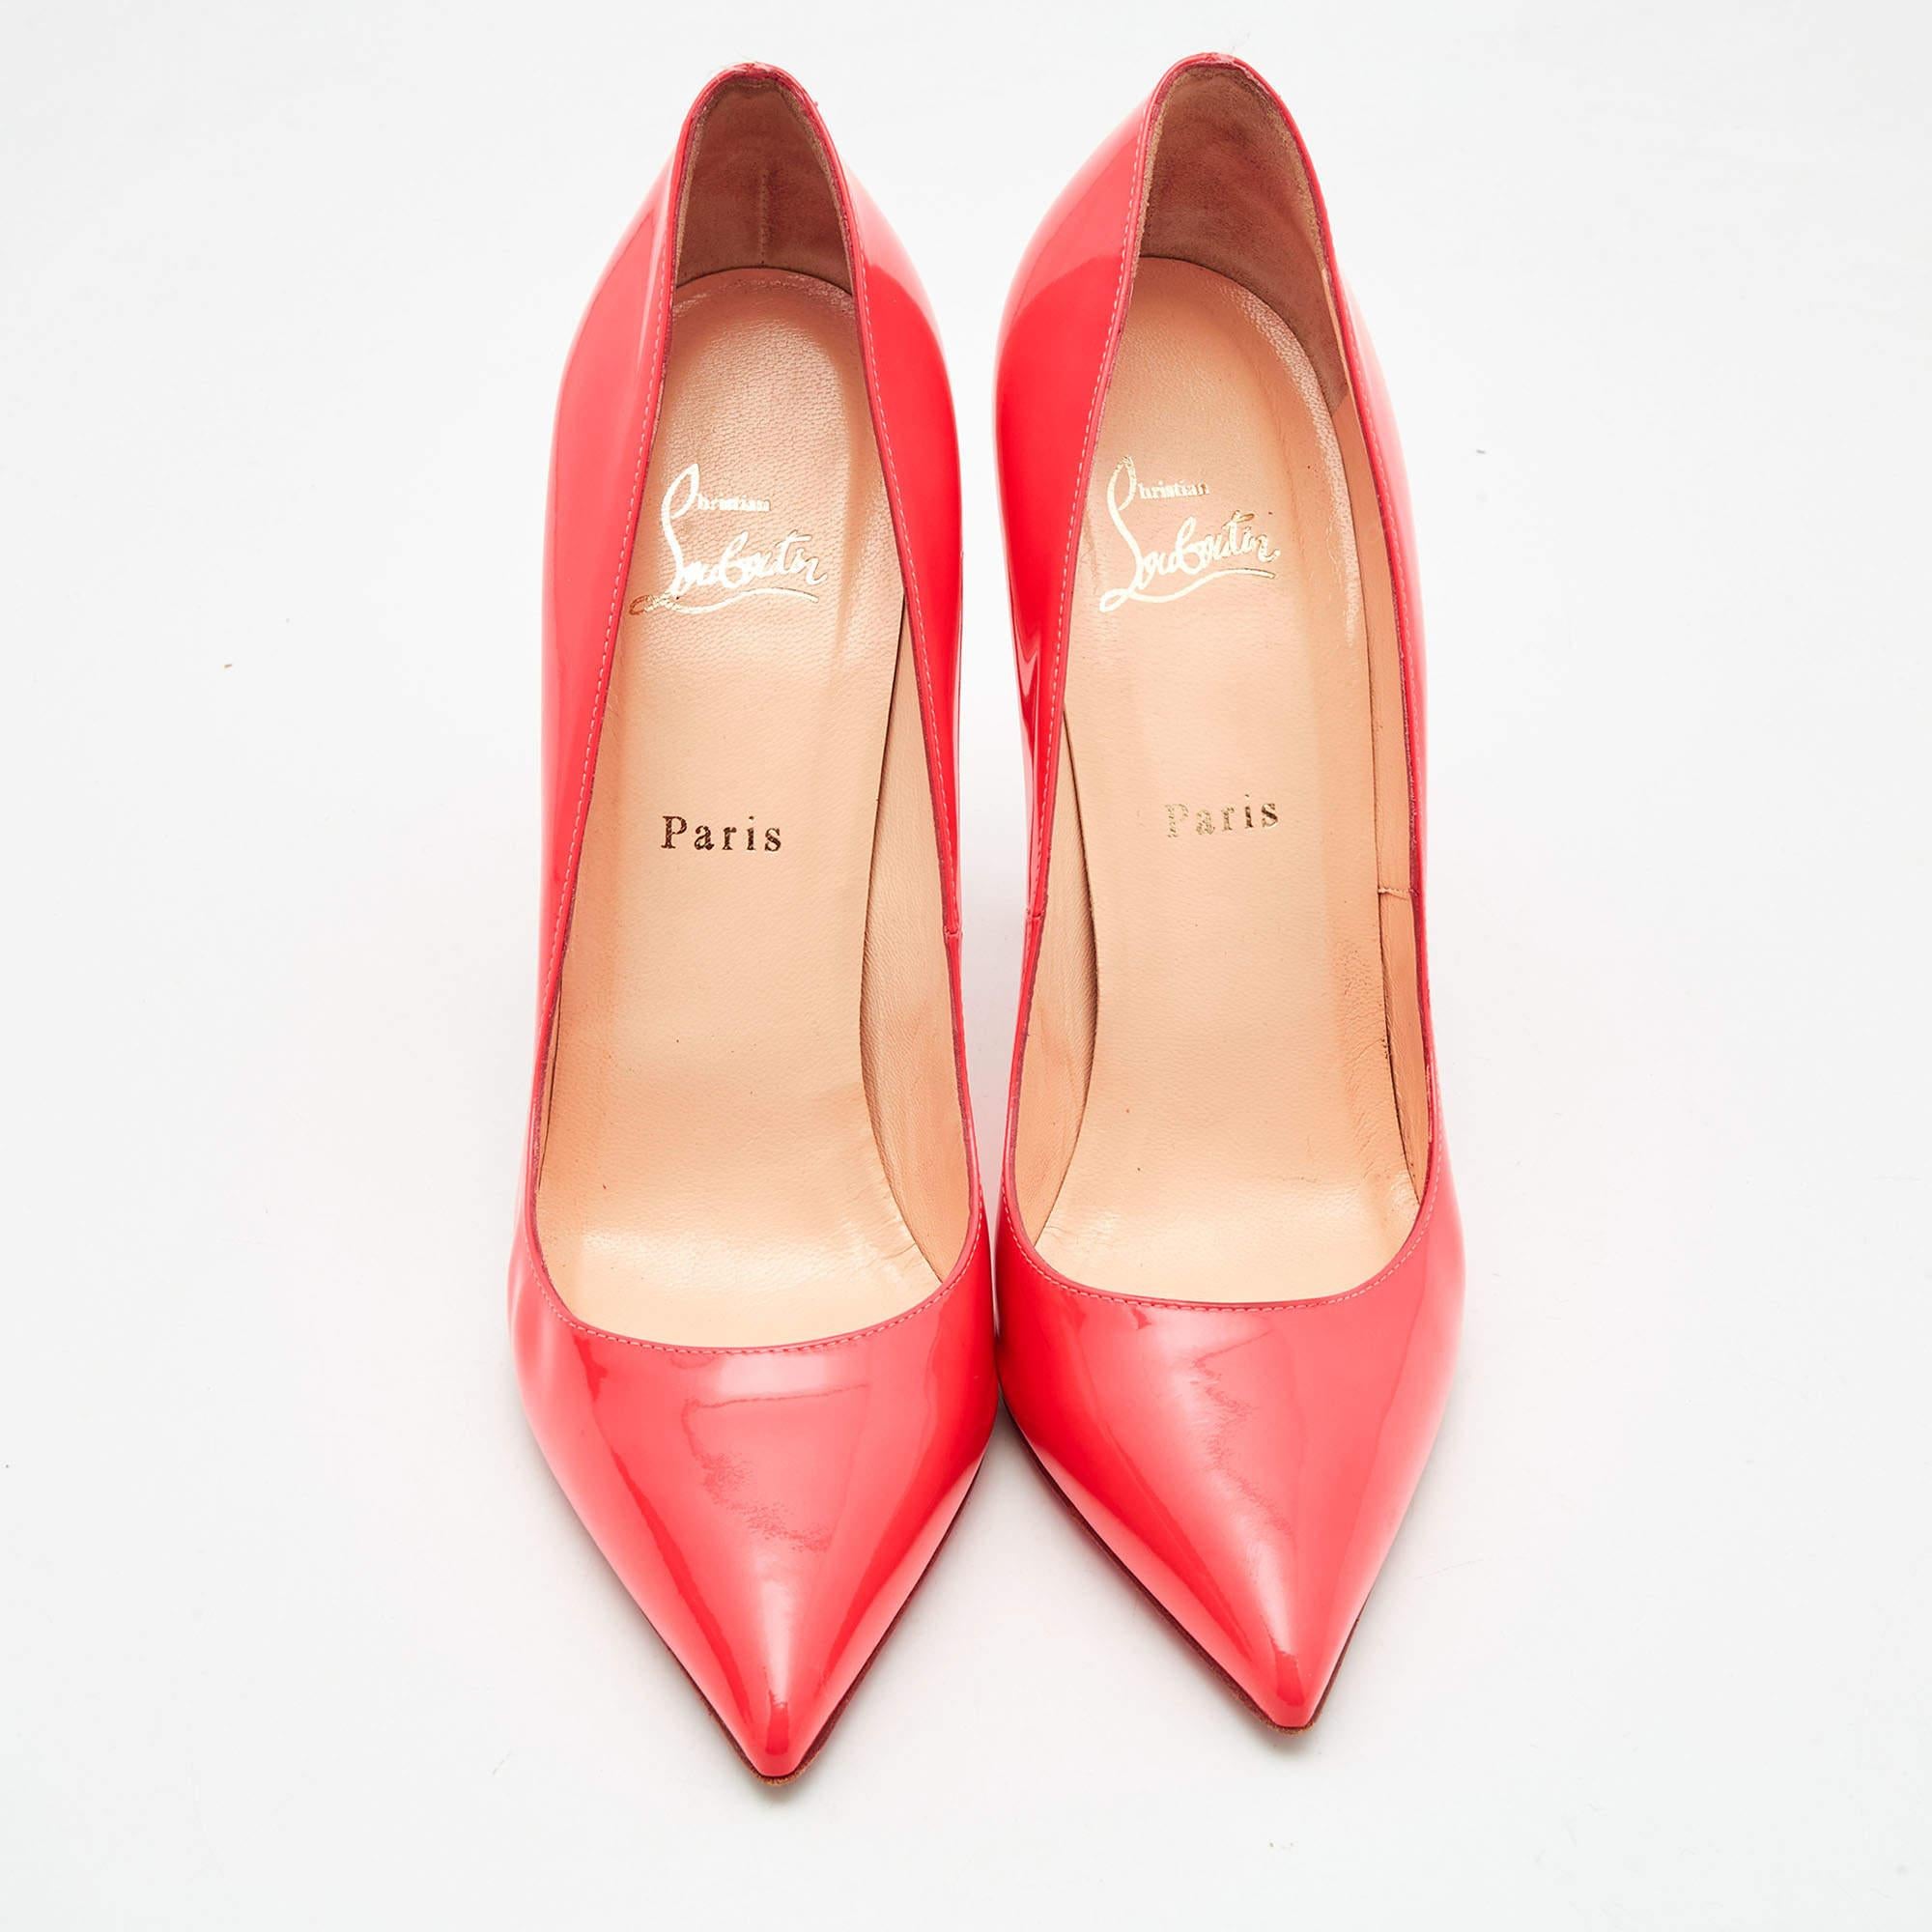 Named after English model Kate Moss, this pair of Christian Louboutin So Kate pumps reflects elegance and sophistication in every step. Proving the brand's expertise in the art of stiletto making, it has been diligently crafted from neon coral